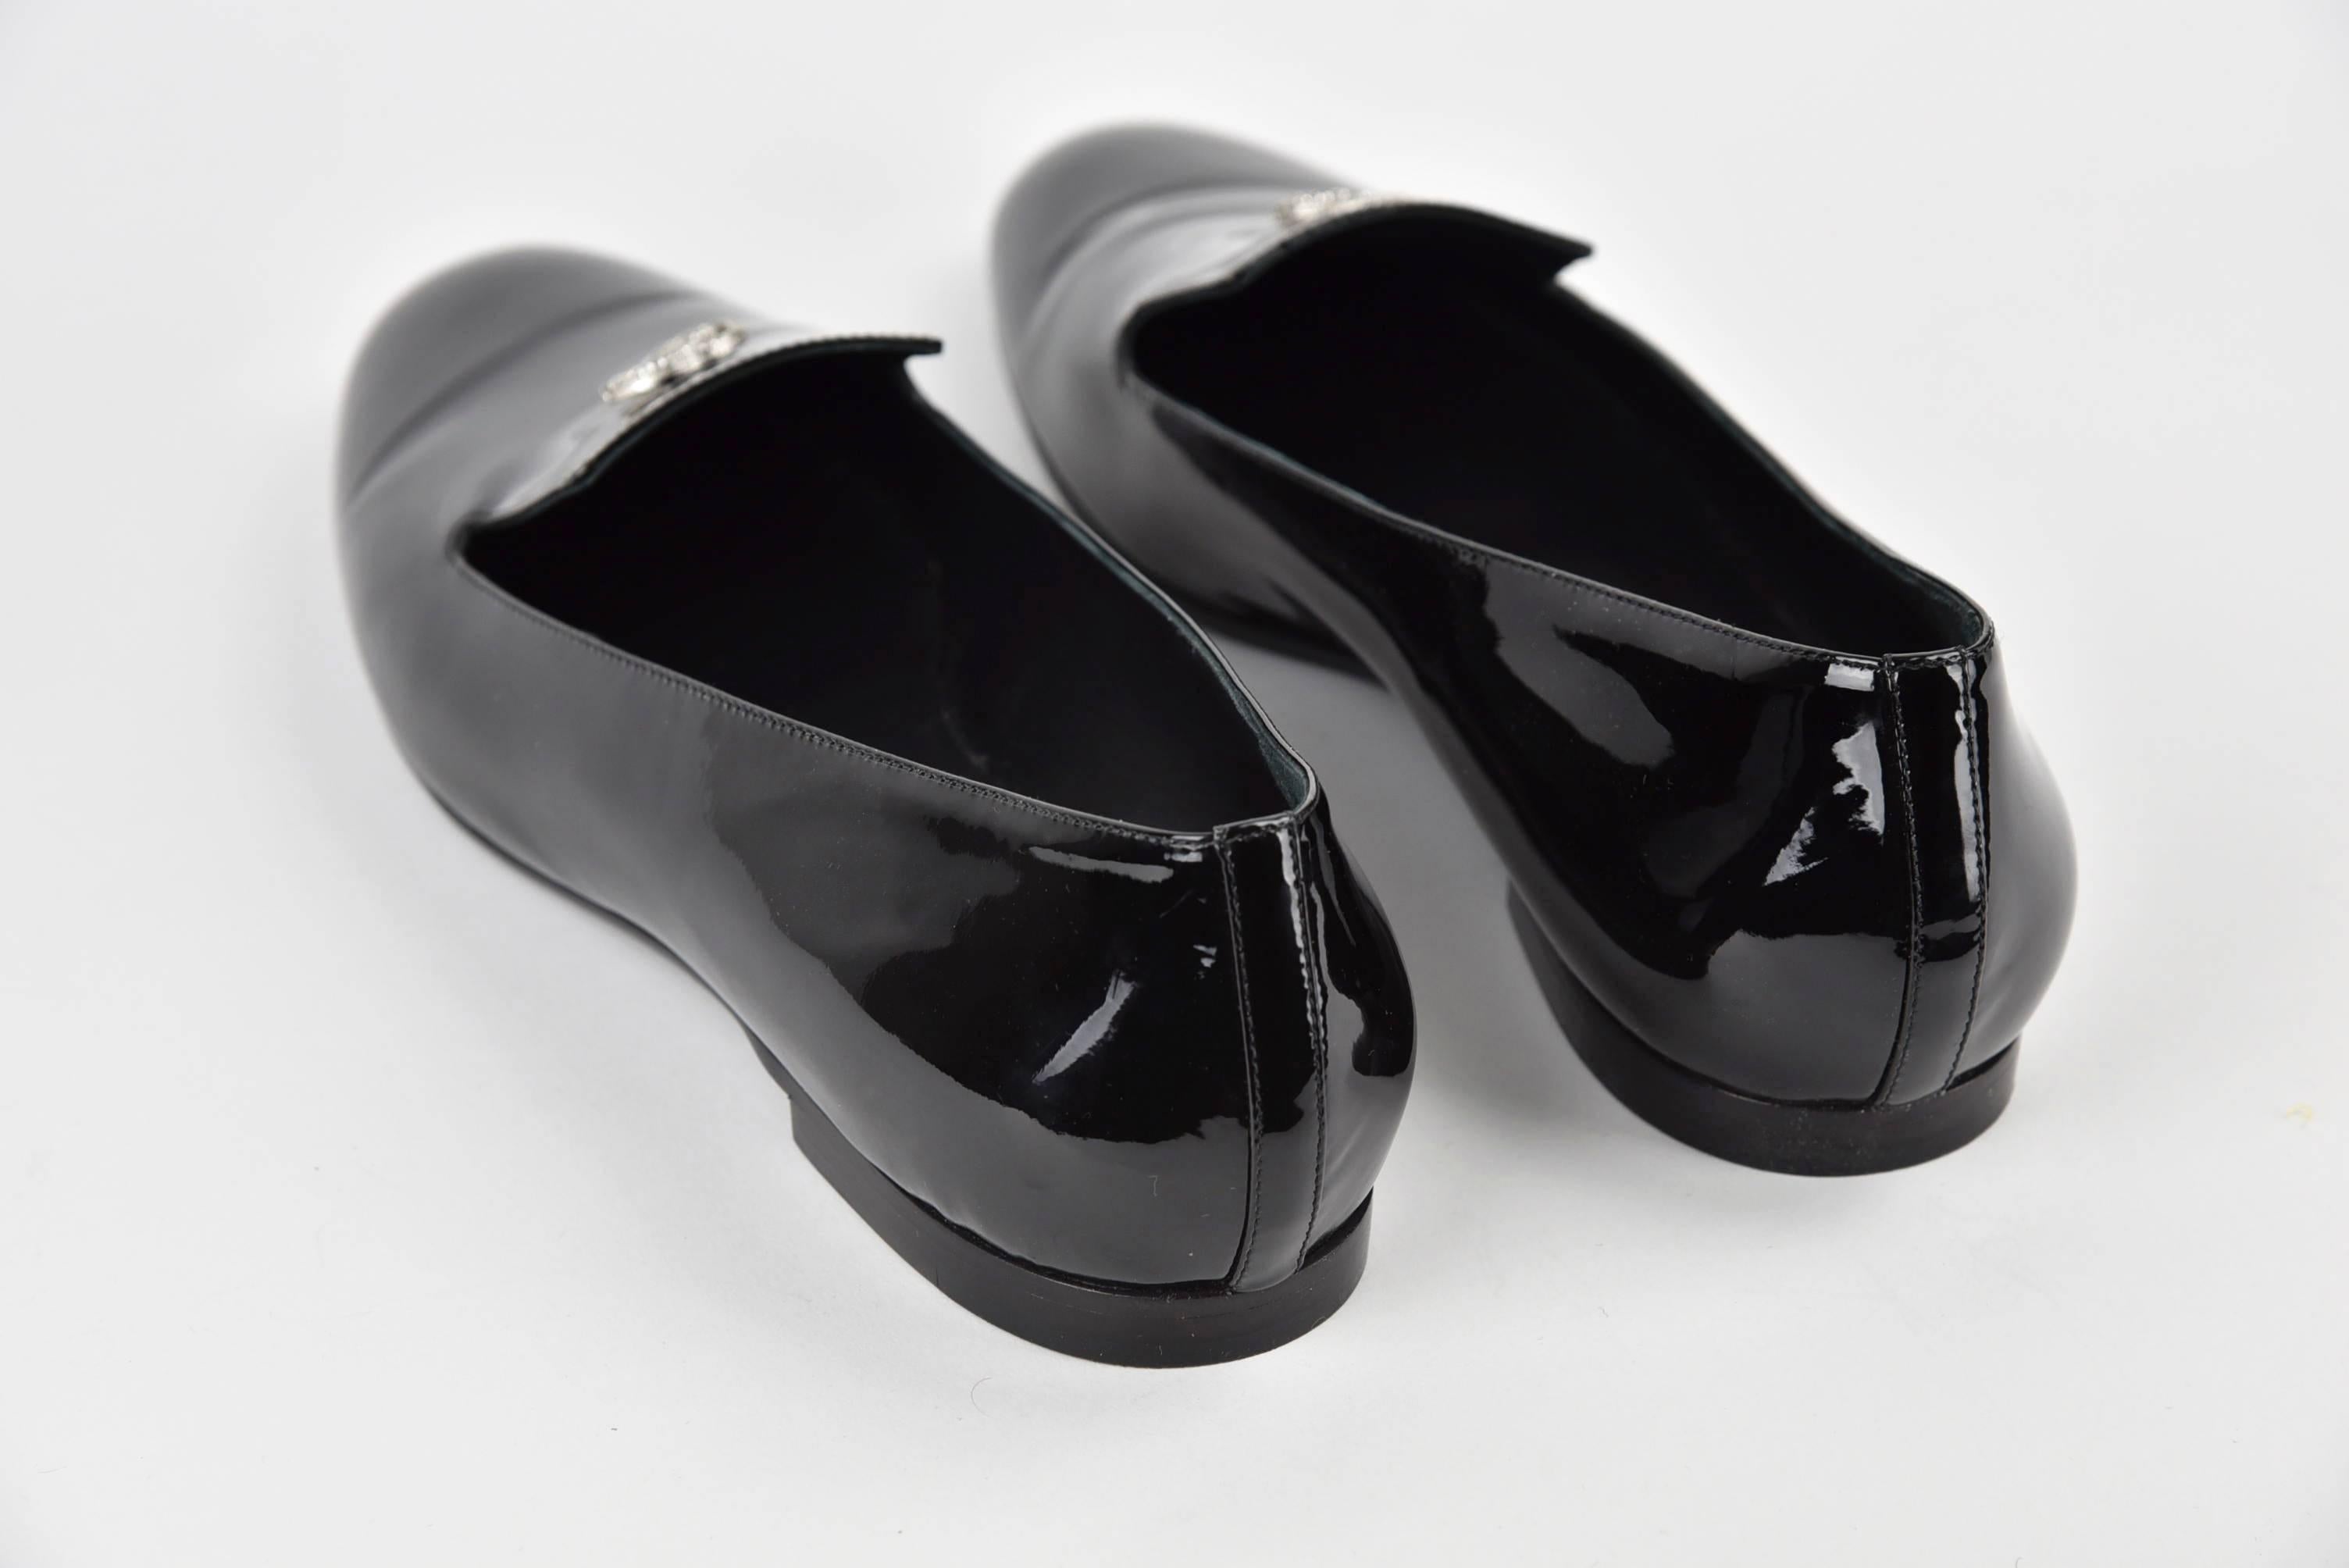 2015 Chanel Black Patent Leather Loafers with Rhinestone CC FR 40 1/2 5